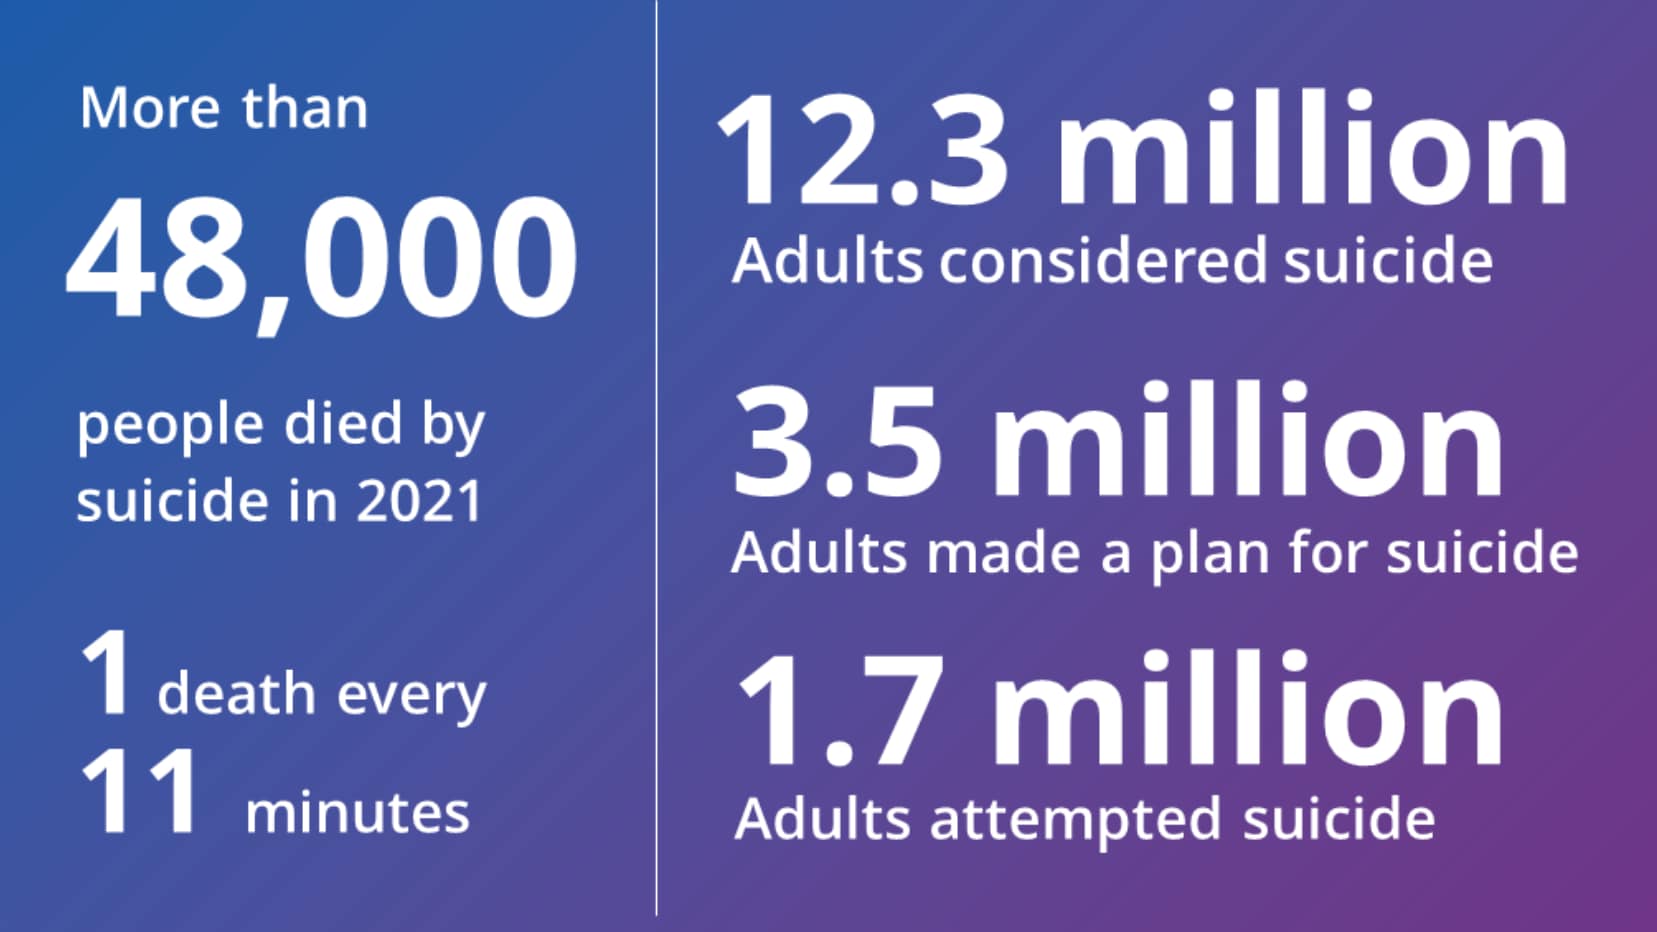 More than 48,000 people died by suicide in 2021. That is 1 death every 11 minutes. 12.3 million adults seriously thought about suicide. 3.5 million adults made a plan. 1.7 million adults attempted suicide.